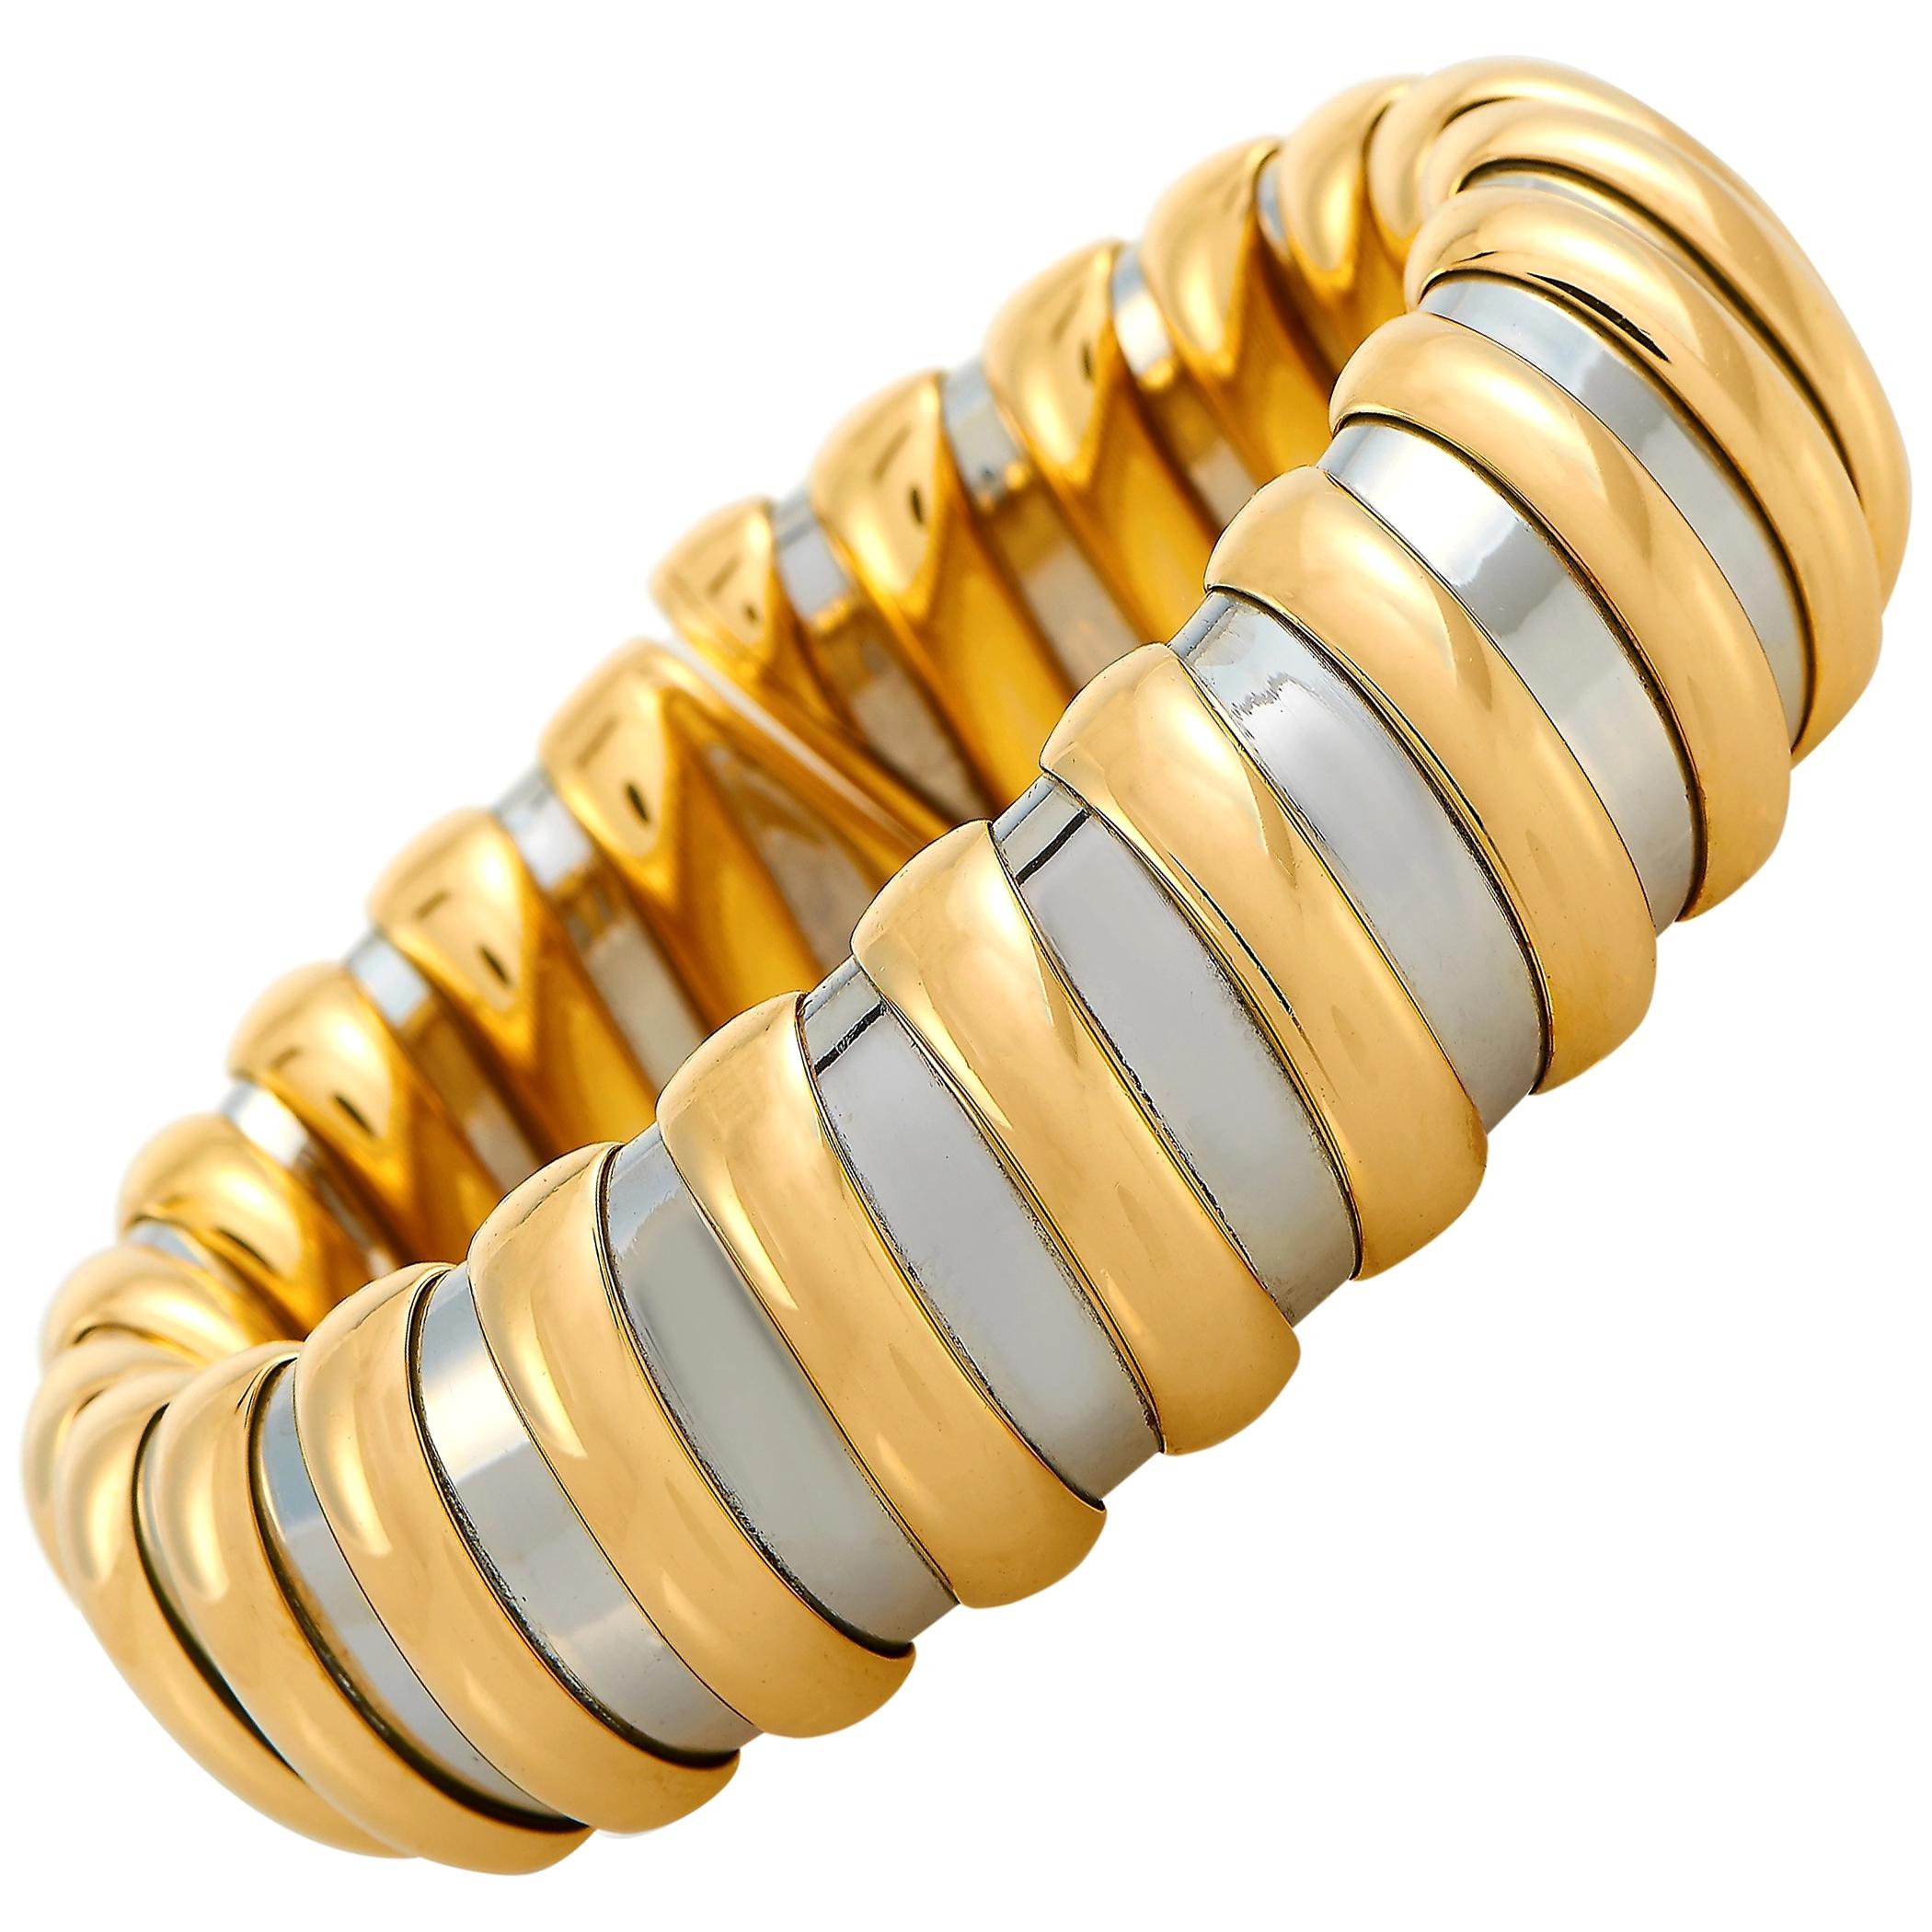 This Bvlgari bracelet is made out of 18K yellow gold and stainless steel and weighs 89.1 grams. It measures 7.85” in length and boasts a 2.50” diameter.
 
 The bracelet is offered in estate condition and includes the manufacturer’s box.